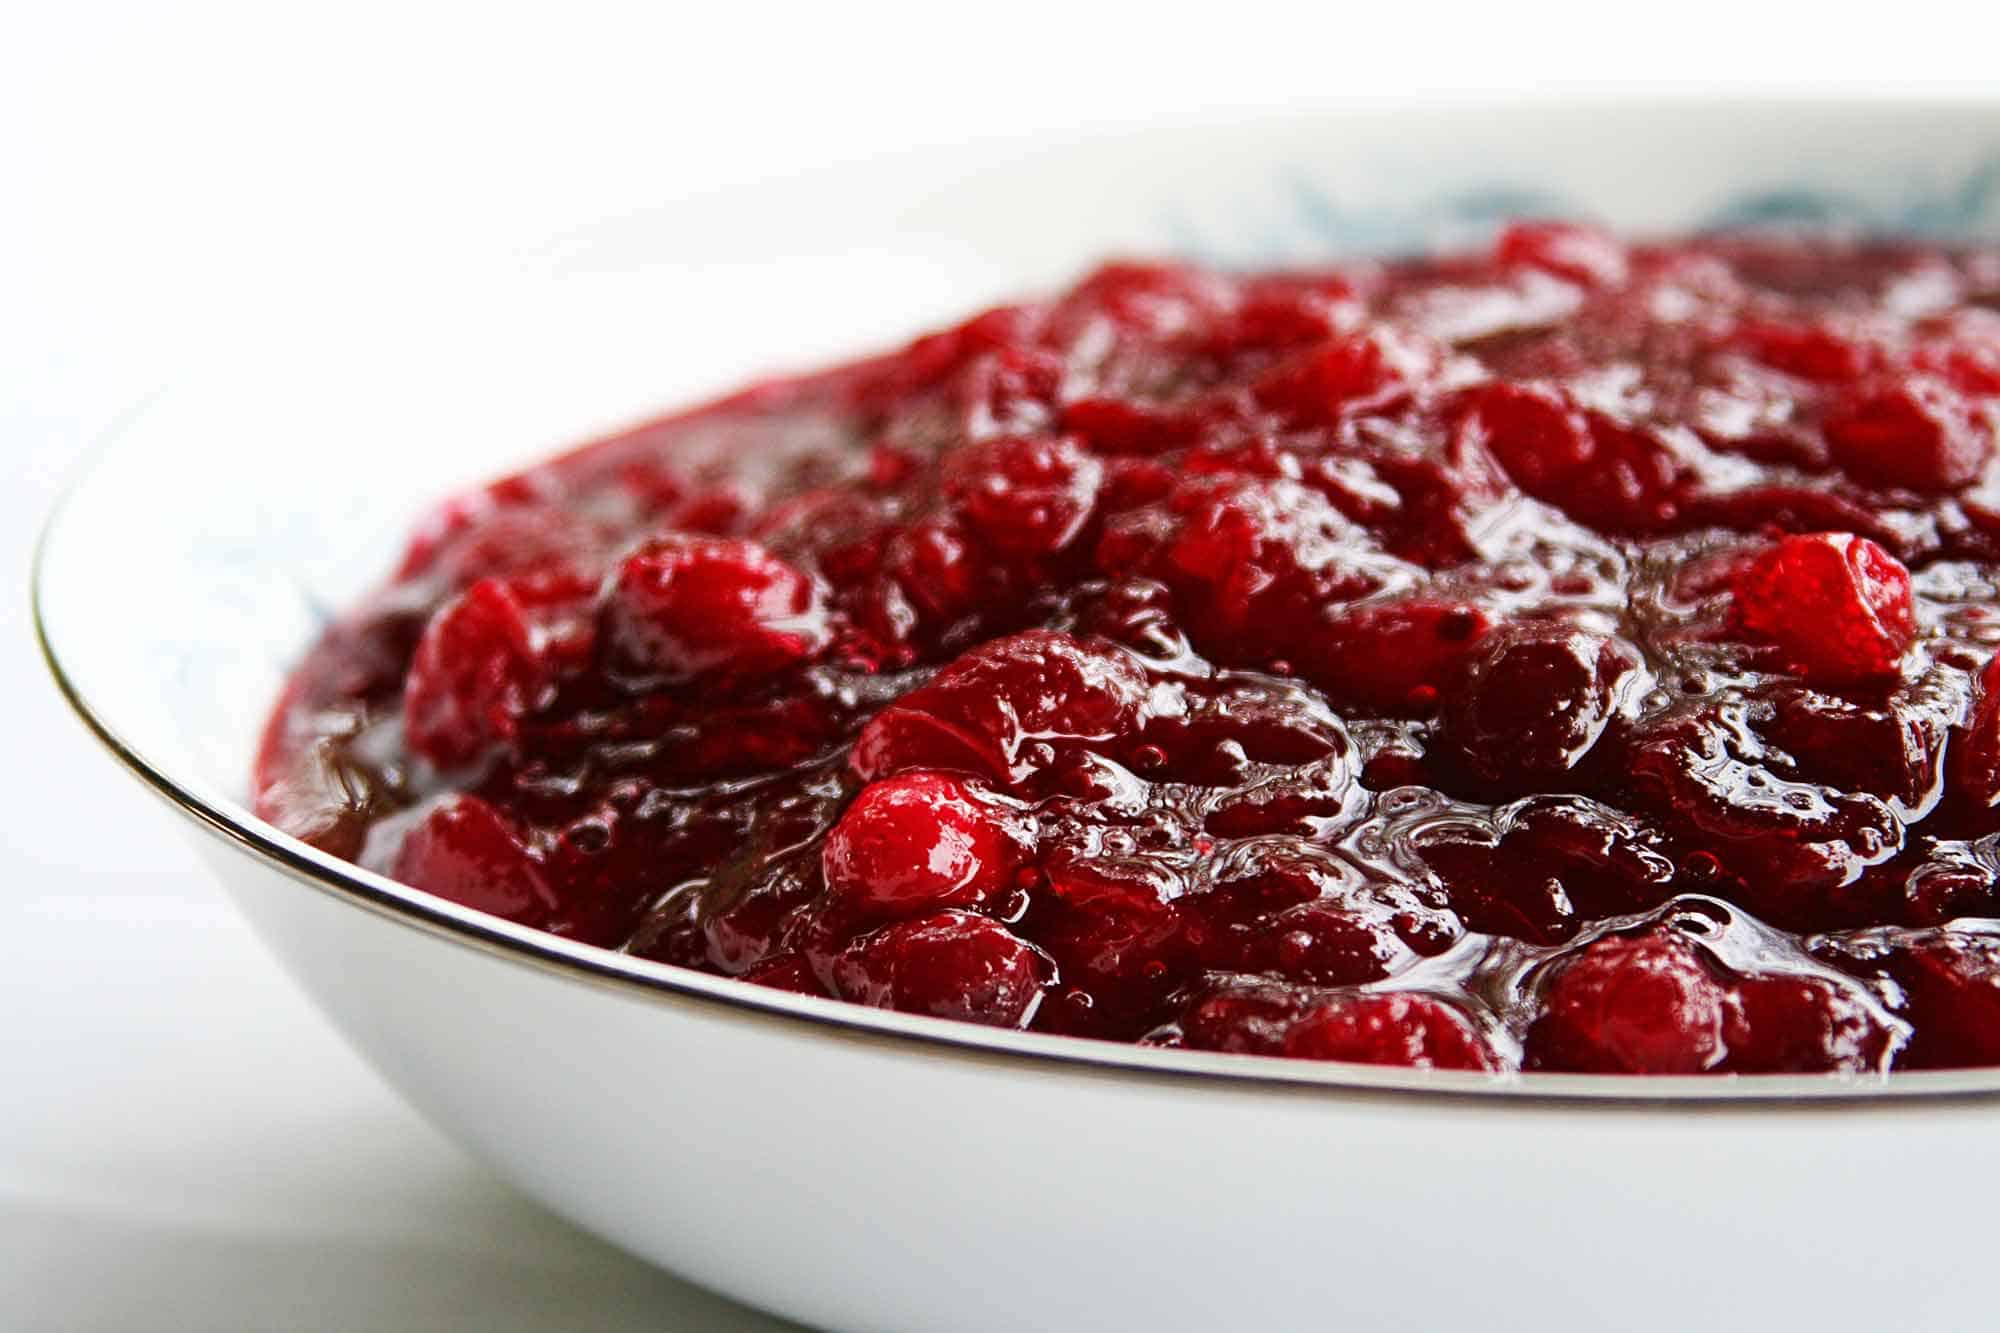 Traditional homemade cranberry sauce 15 Most Tasty Cranberry Recipes That Are Homemade